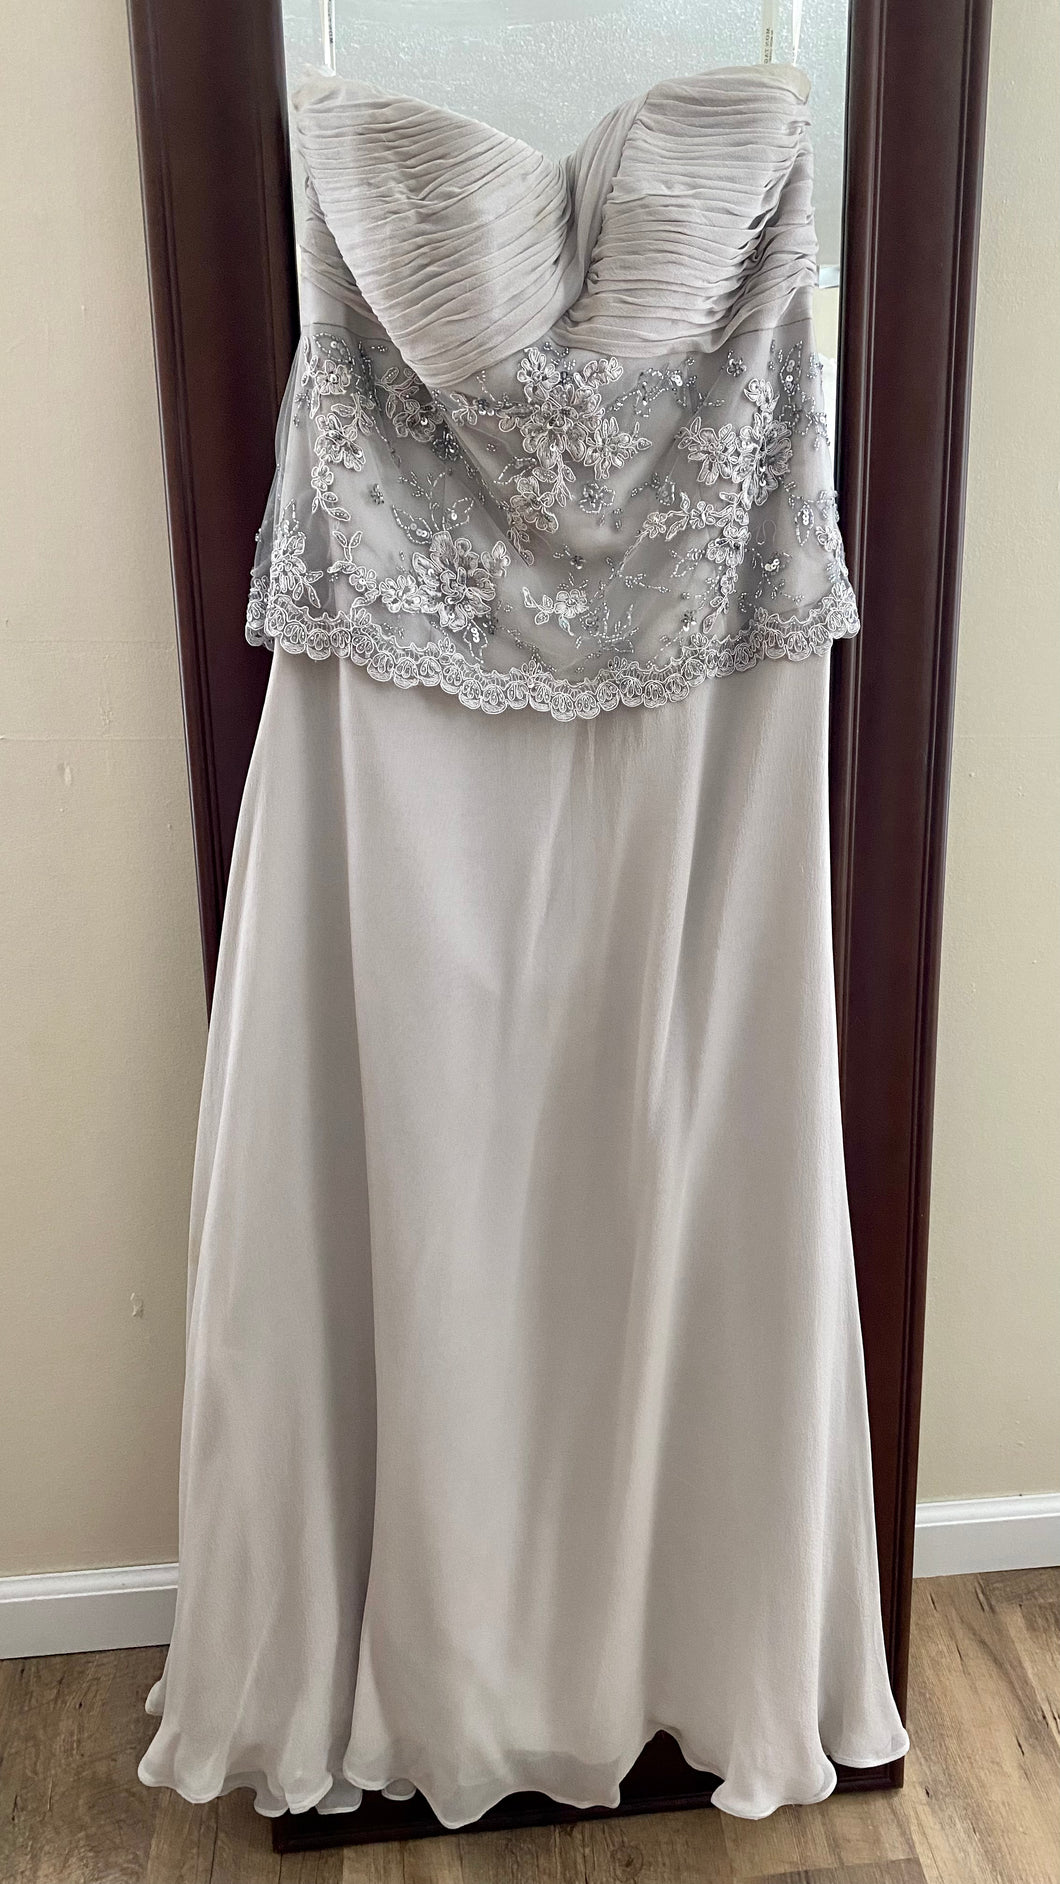 HADD100-B Grey Mother’s Gown. Size 12P